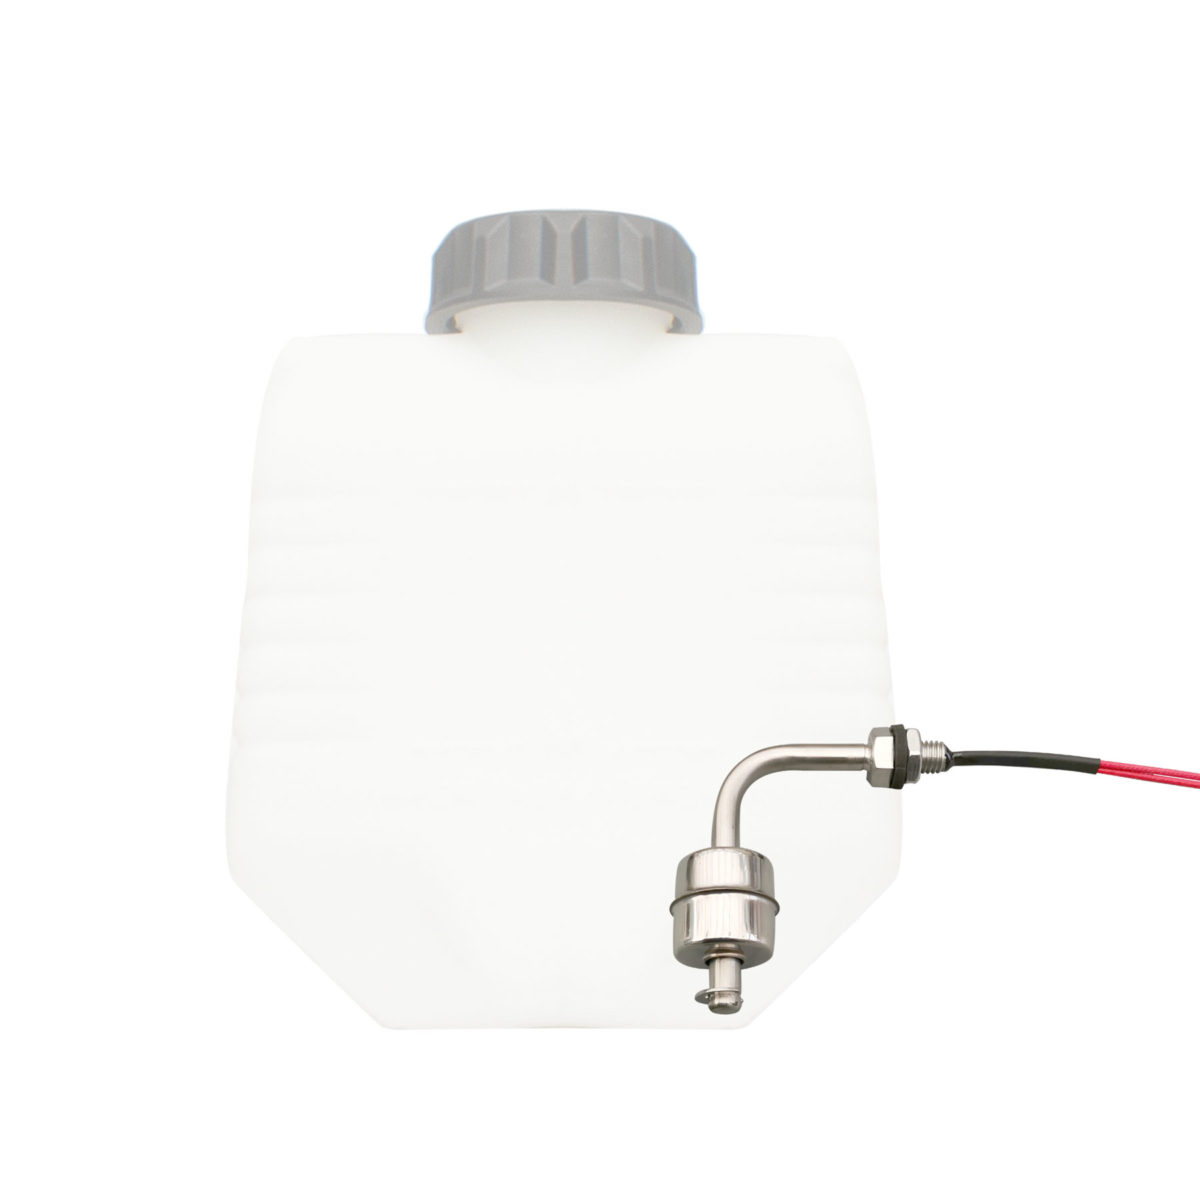 how to mount a water level sensor